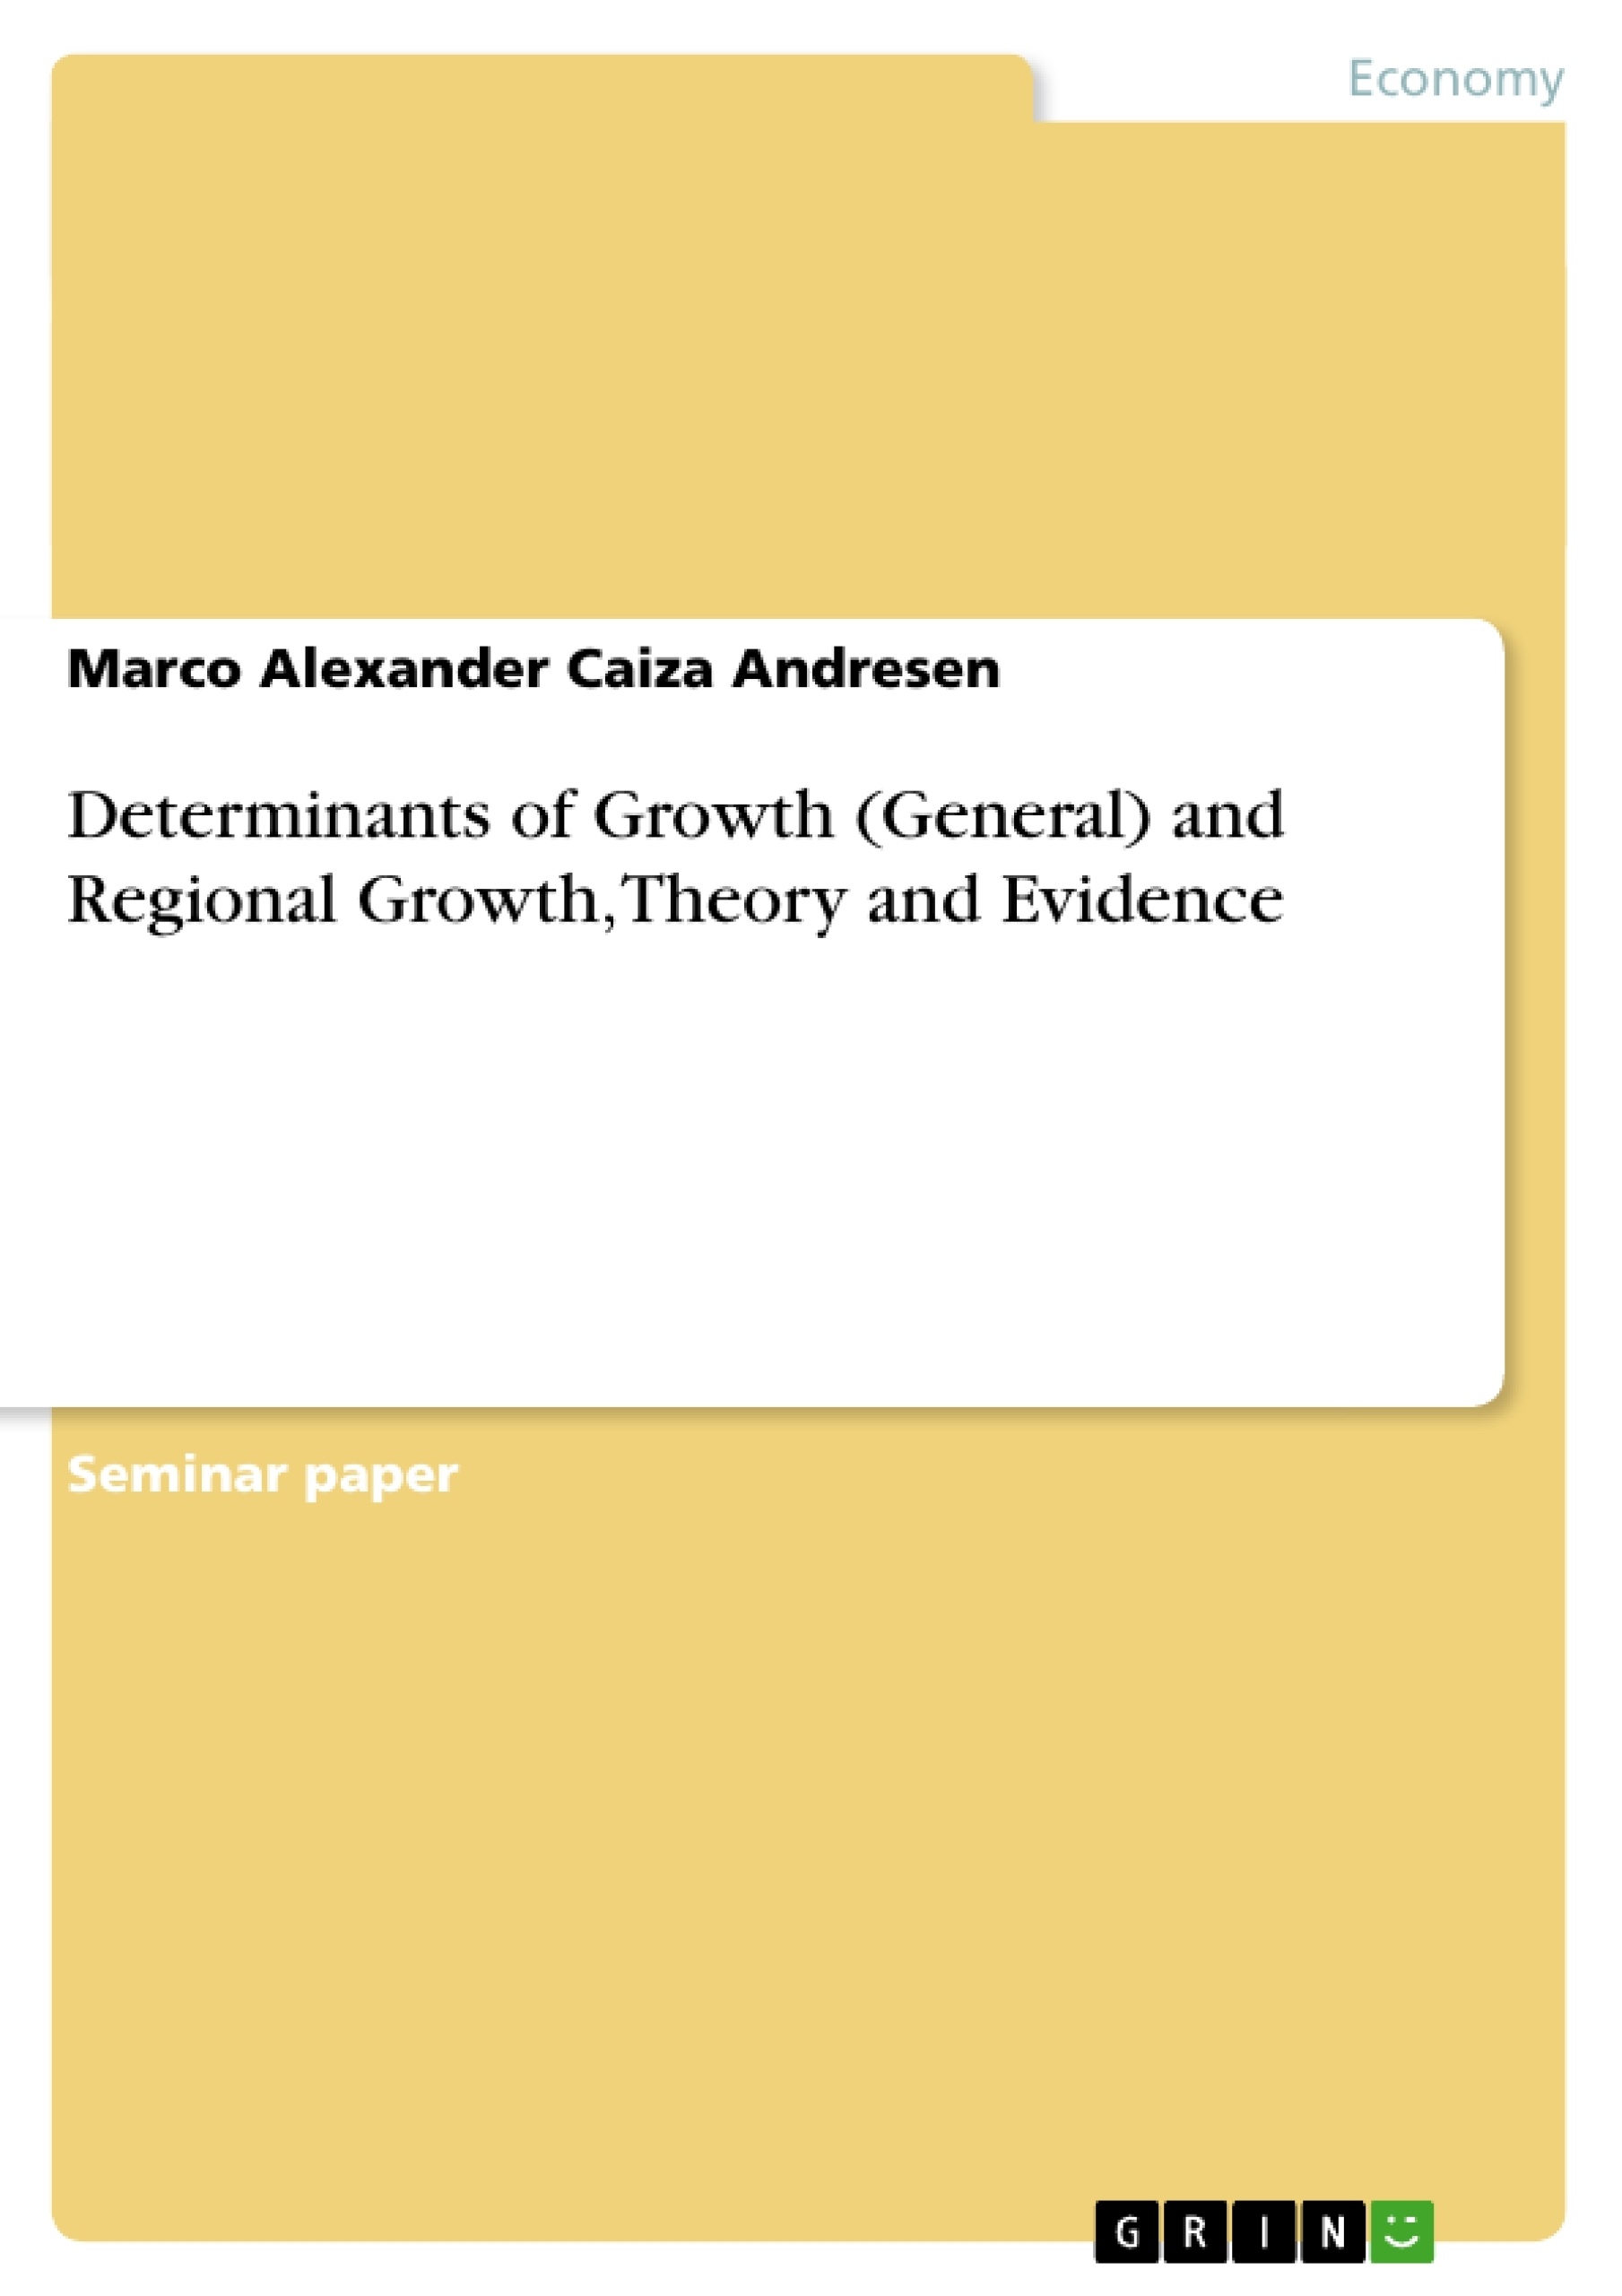 Título: Determinants of Growth (General) and Regional Growth, Theory and Evidence